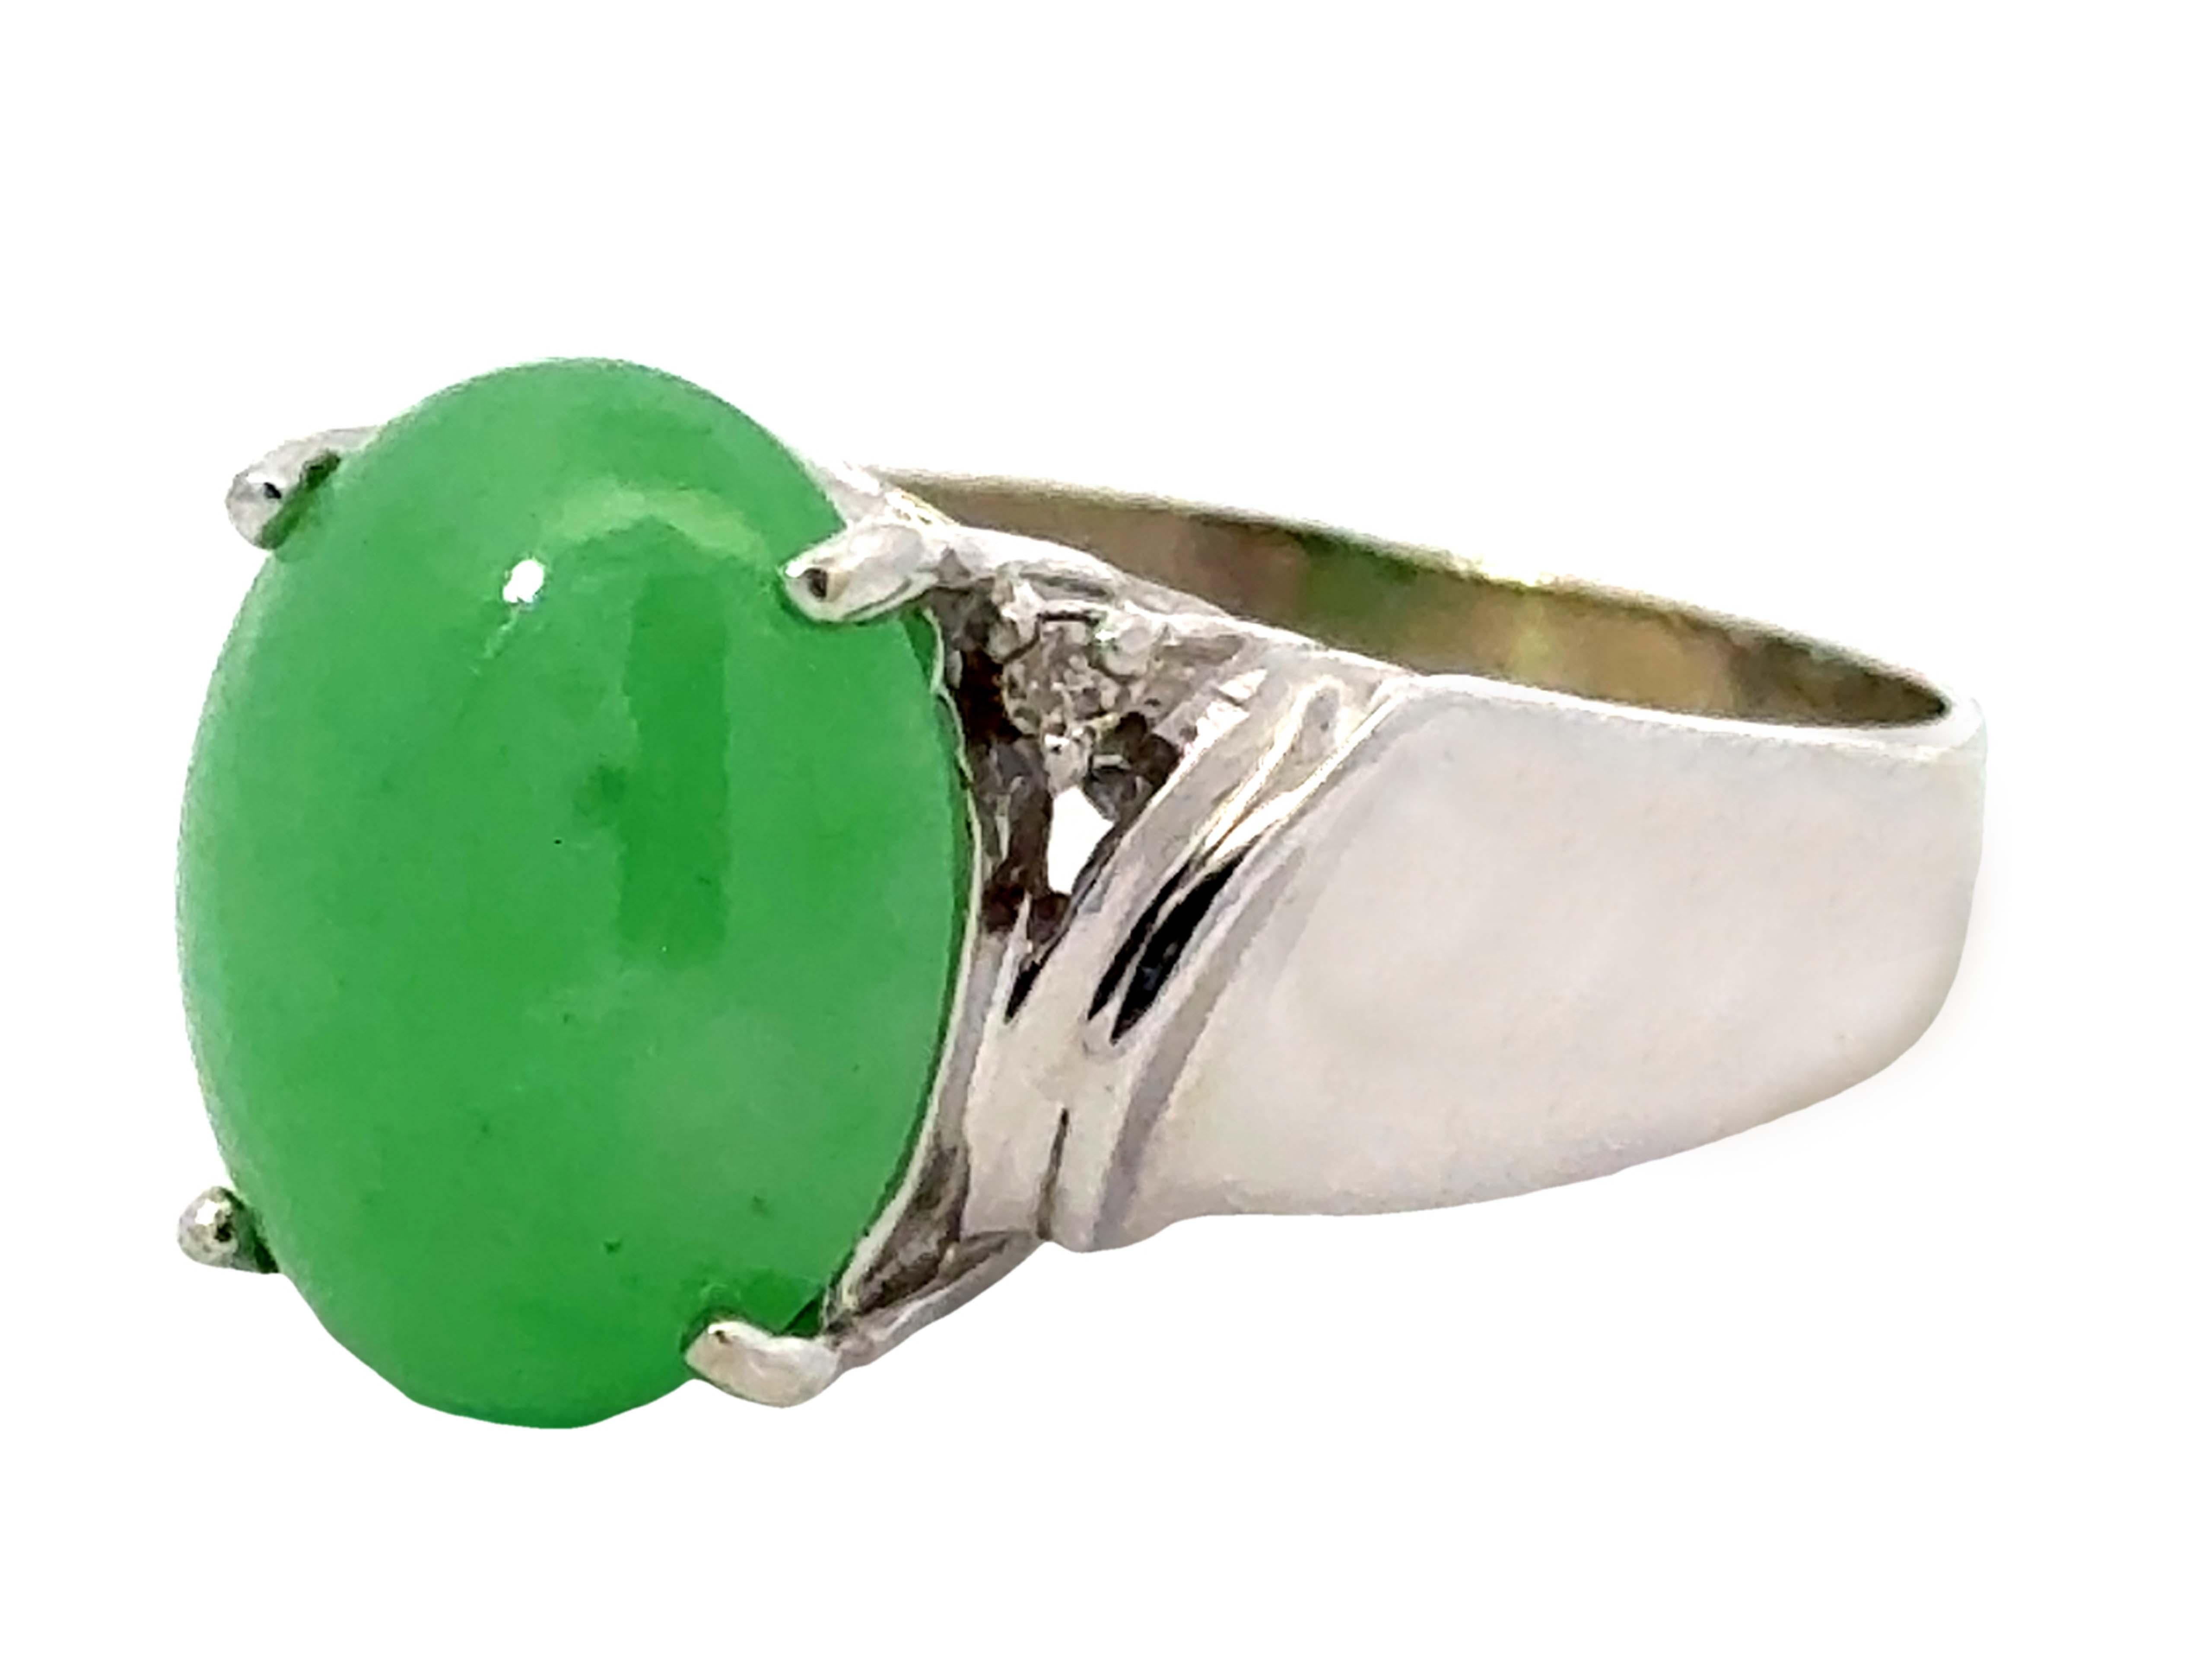 Oval Green Jade Cabochon Diamond Ring 14k White Gold In Excellent Condition For Sale In Honolulu, HI